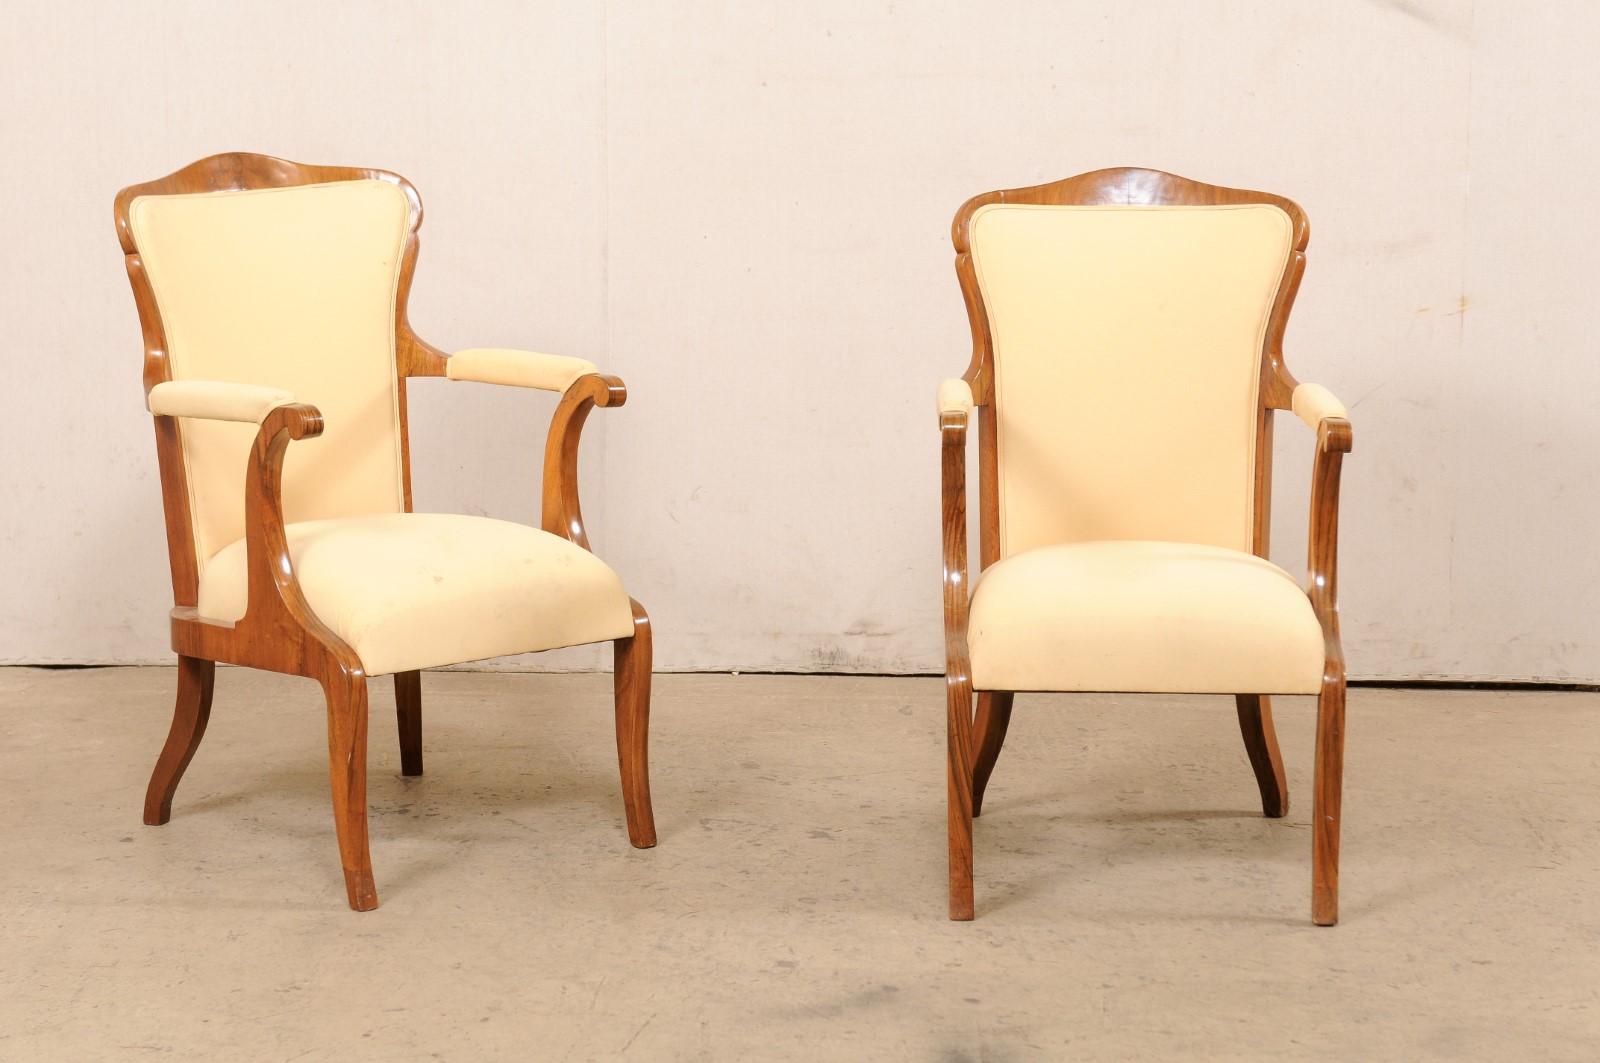 A French pair of carved-wood and upholstered fauteuil armchairs from the early to mid 20th century. This pair of armchairs from France have upholstered backs framed an elegantly carved and arched wooden top-rail, with softly rounded shoulders, that